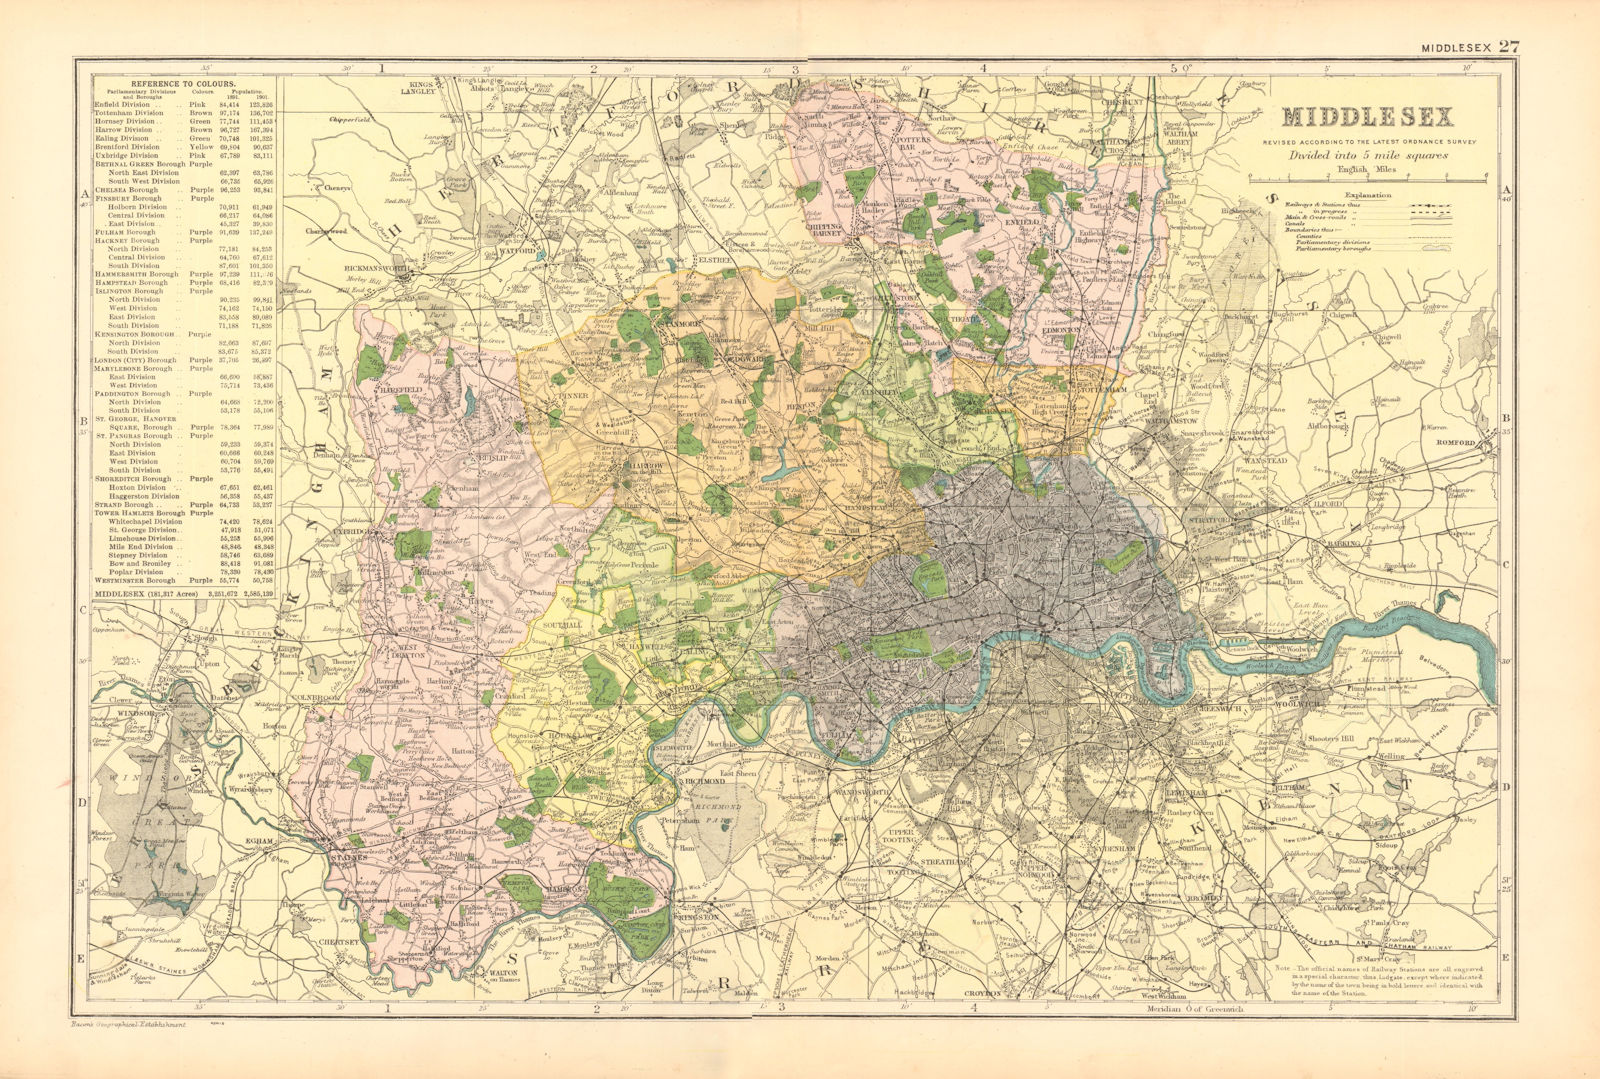 Associate Product MIDDLESEX showing Parliamentary divisions,boroughs & parks.London.BACON 1904 map